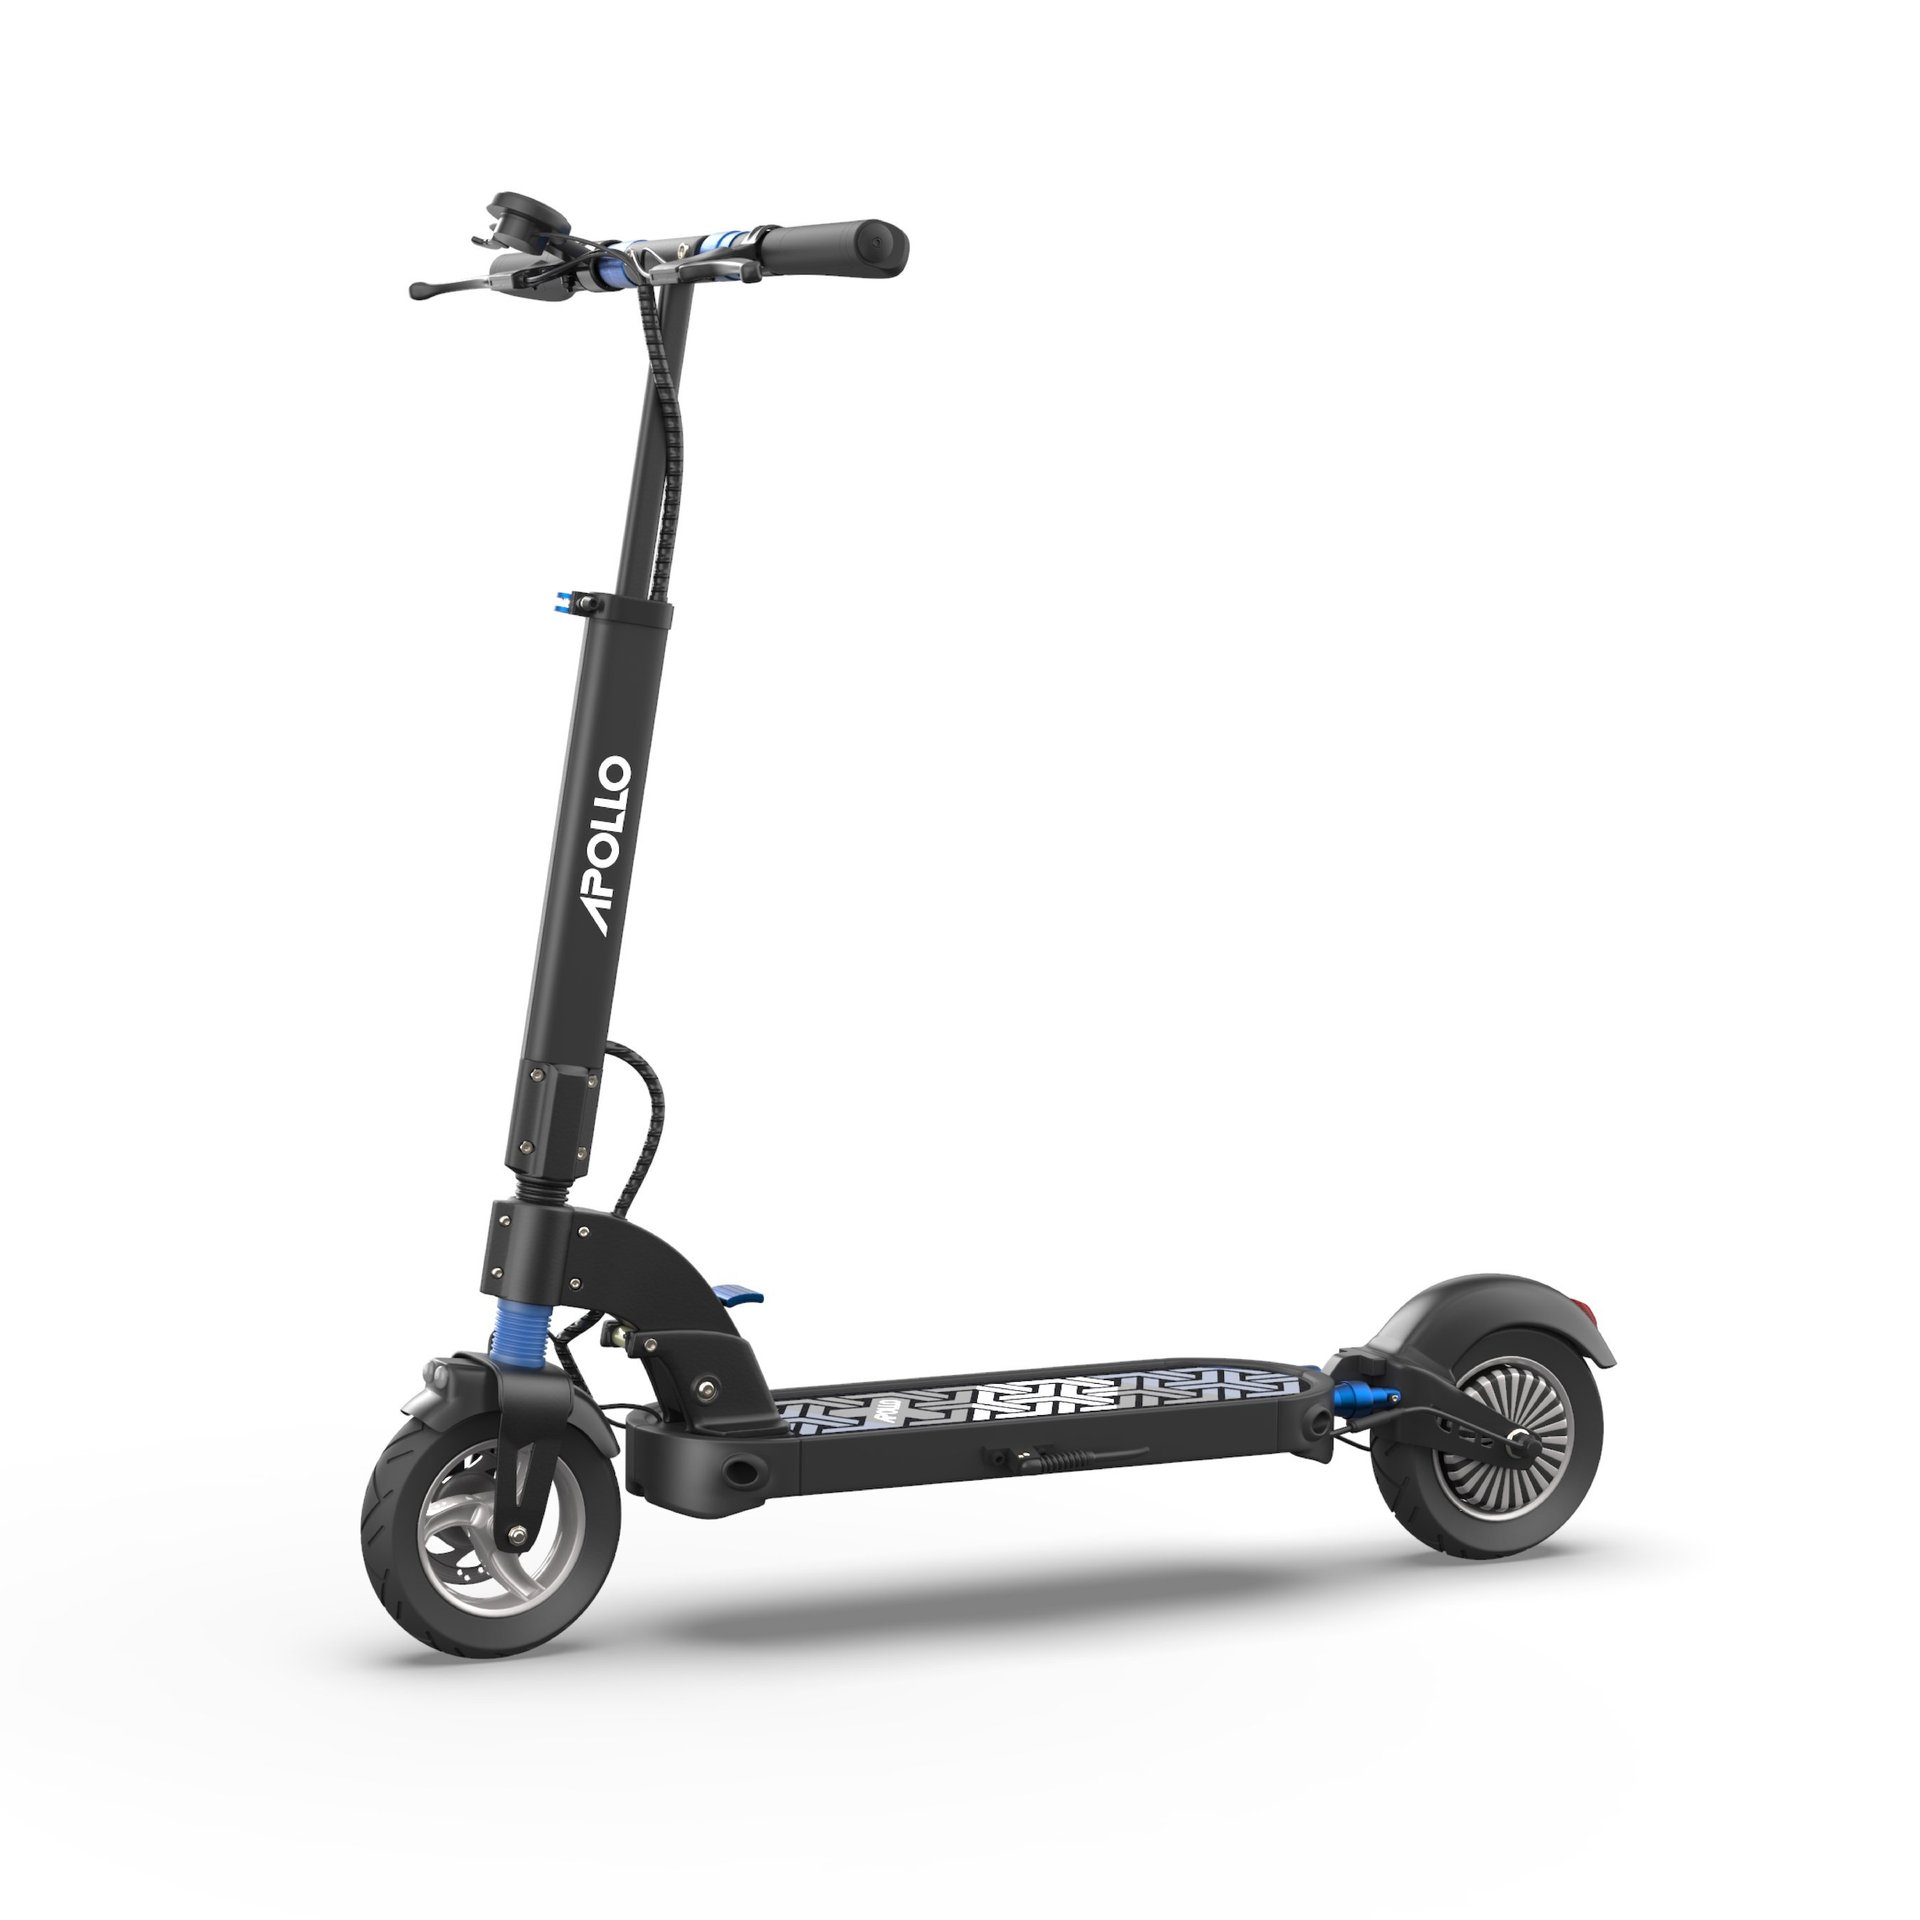 Apollo City (600W) Best Electric Scooter For College Campus